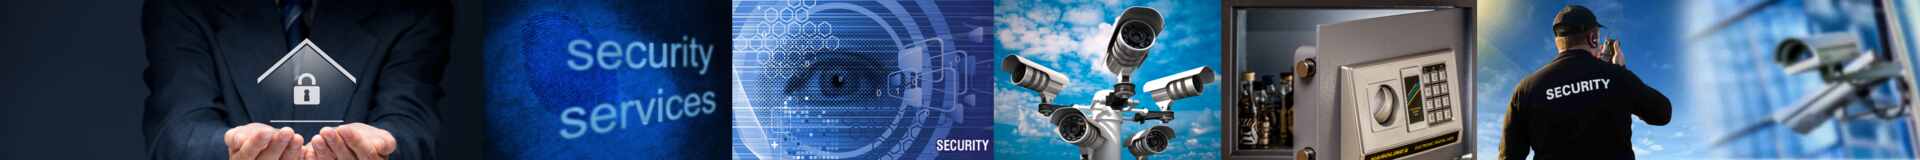 Global Security Services bids and RFP from Germany